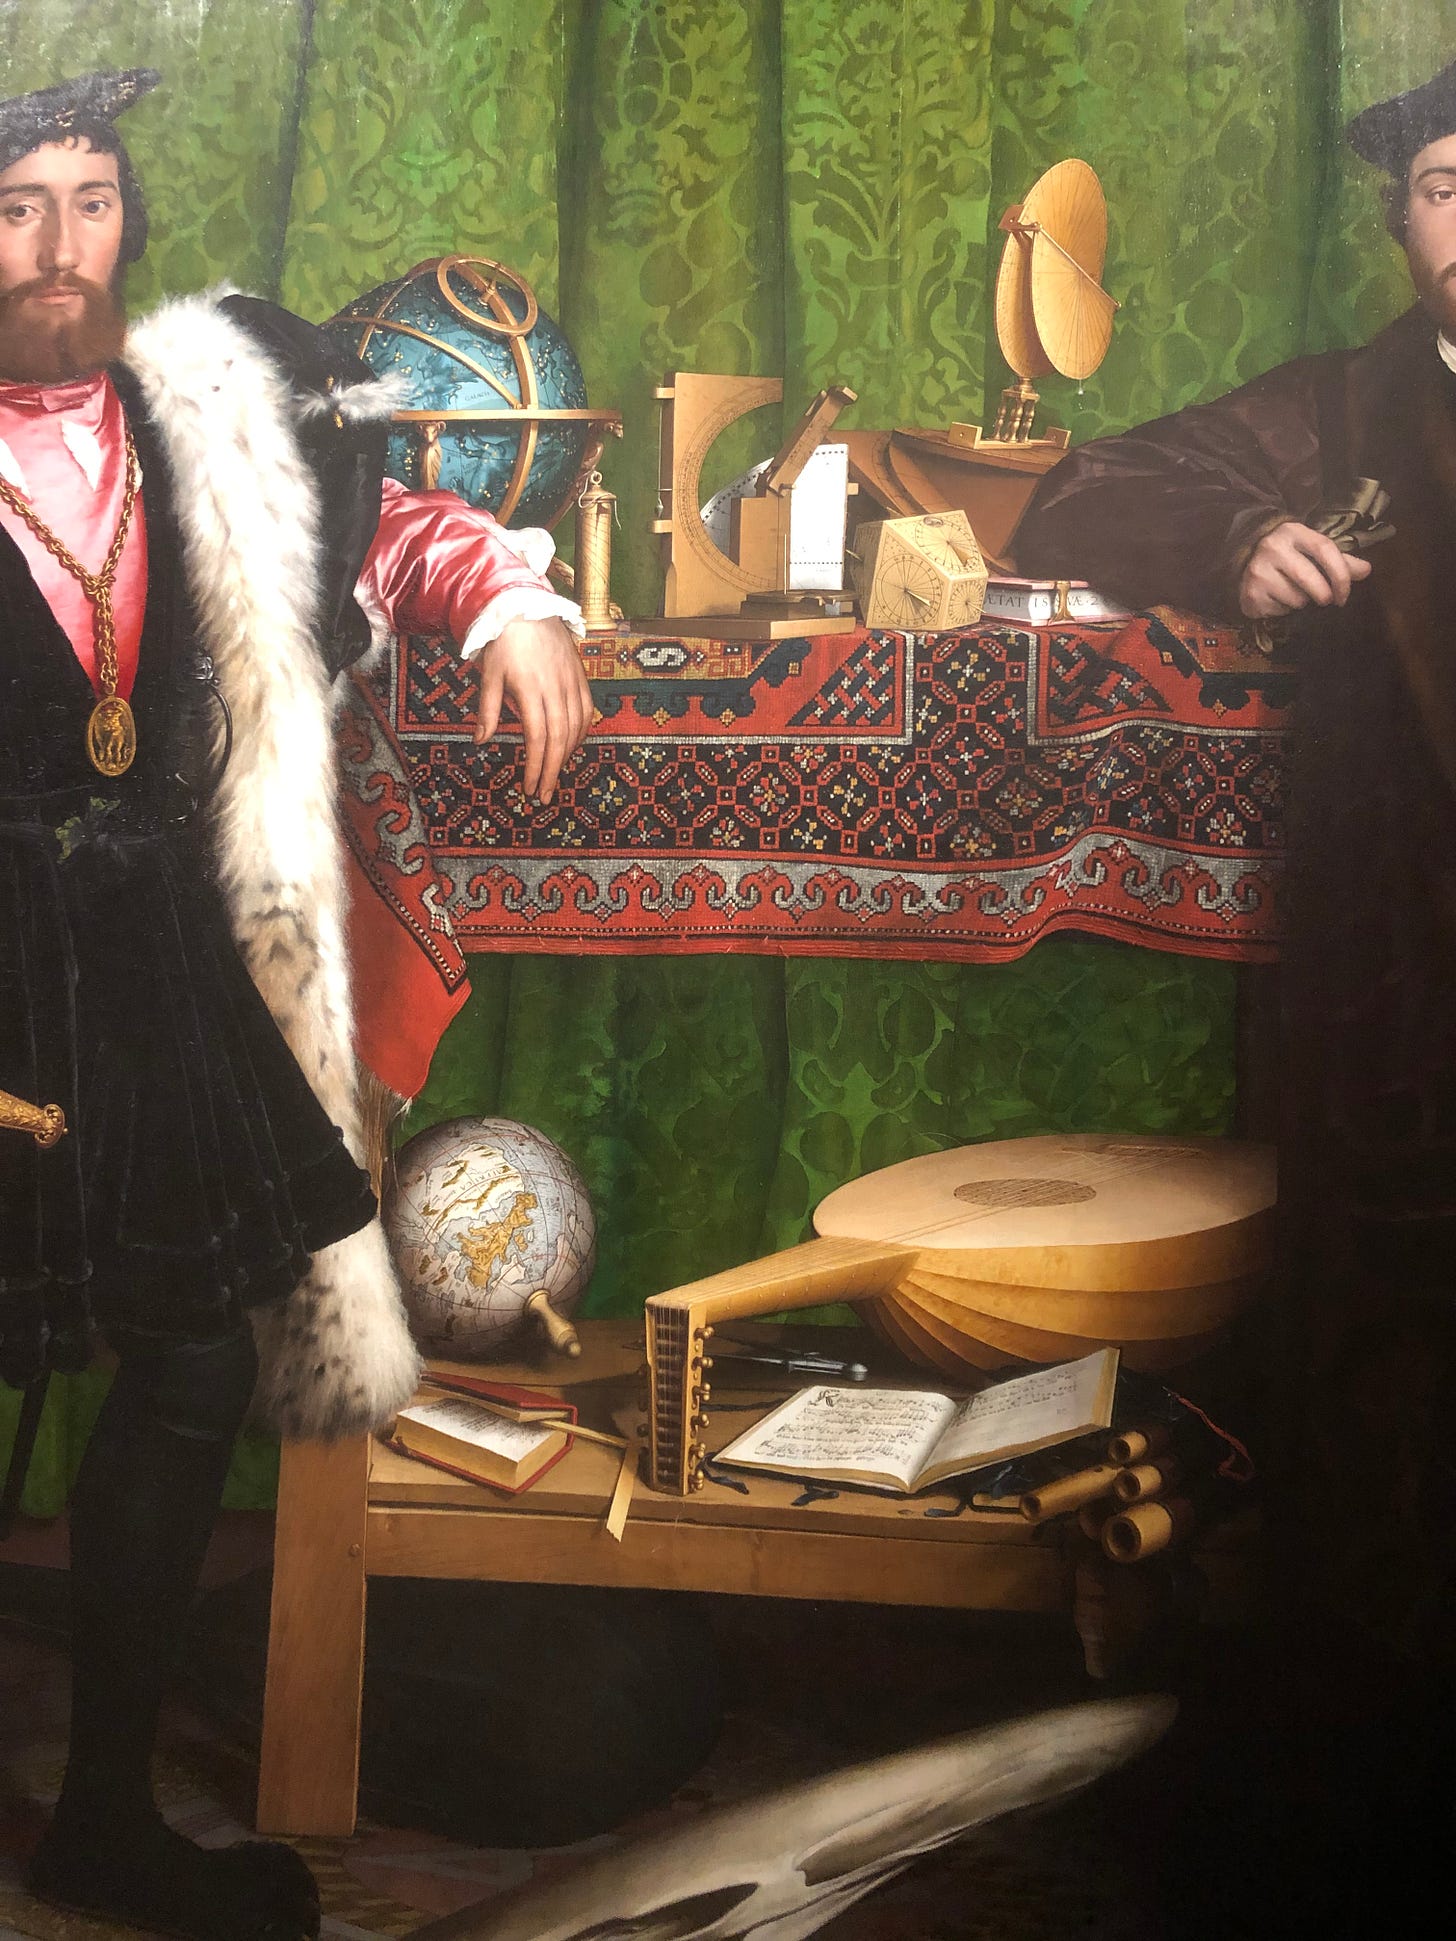 A close up of the table in the painting described above - the instruments and sheet music, globe and mathematical instruments are clearly visible. The top of the table is covered with a red and black woven carpet.